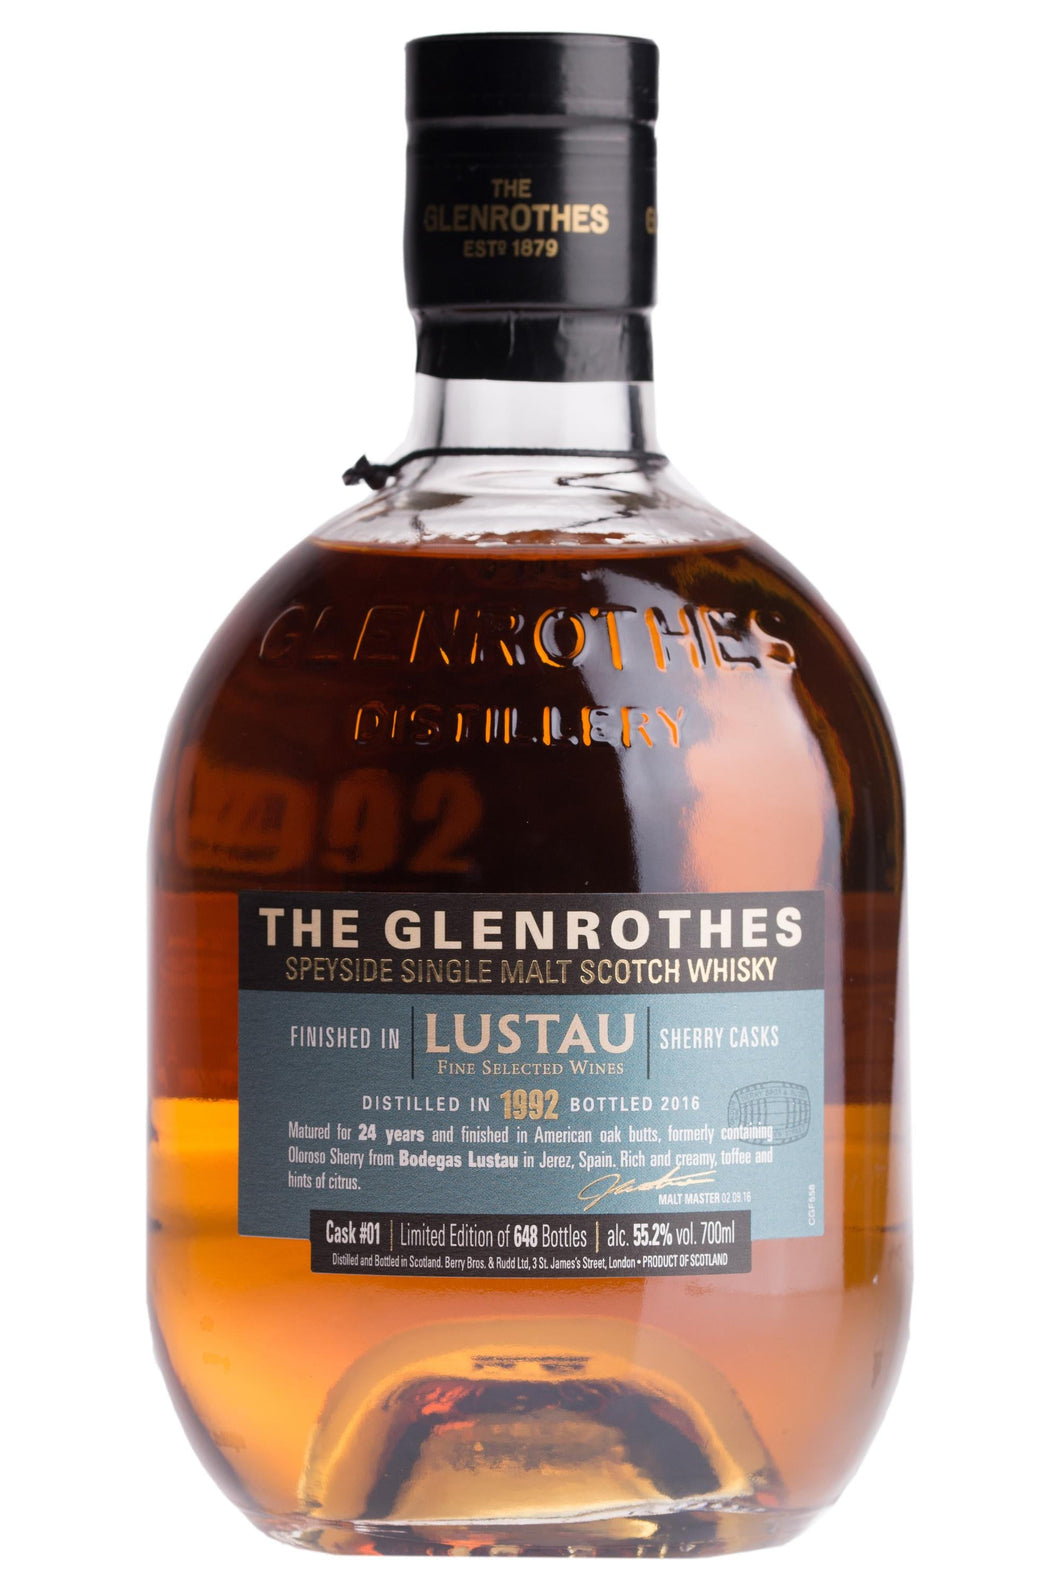 The Glenrothes Lustau Sherry Cask